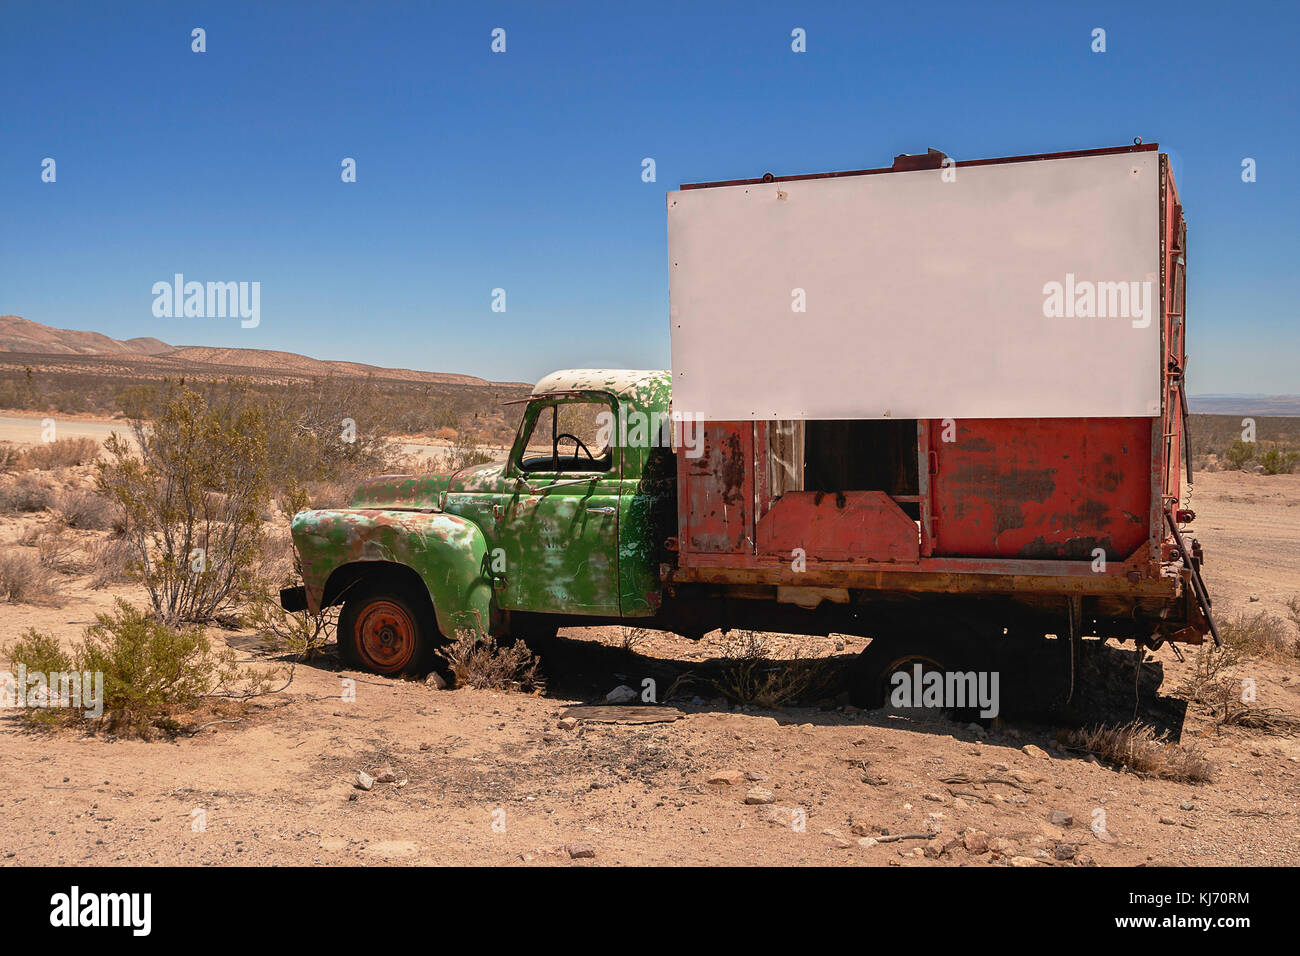 A wreckage of a red and green truck with a white large signboard in the desert. Stock Photo